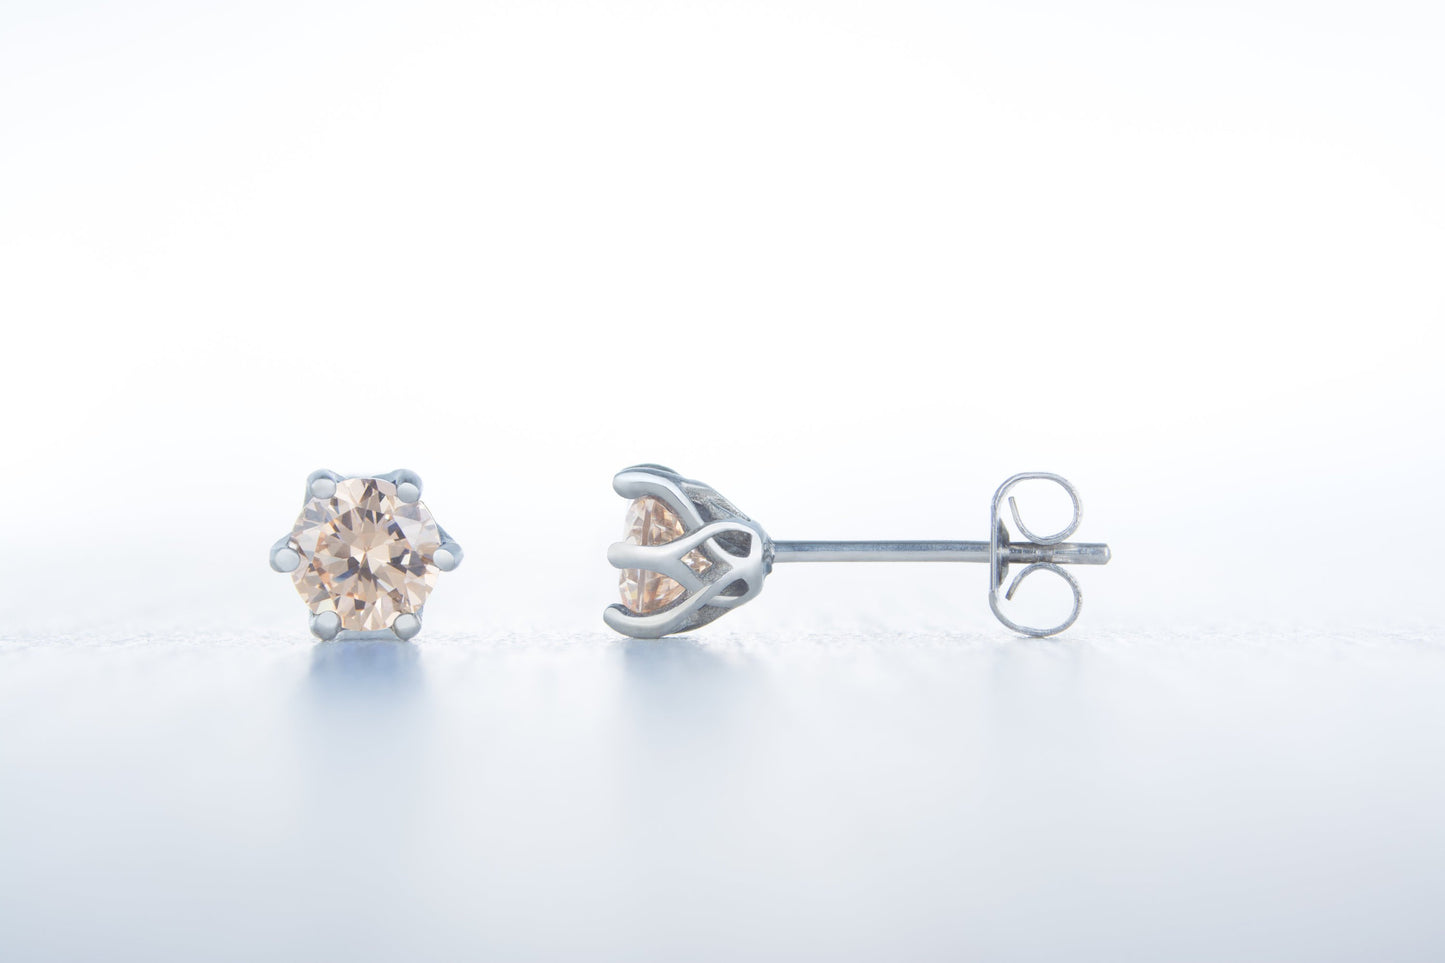 Natural Citrine stud earrings, available in titanium, white gold and surgical steel 4mm, 5mm and 6mm sizes